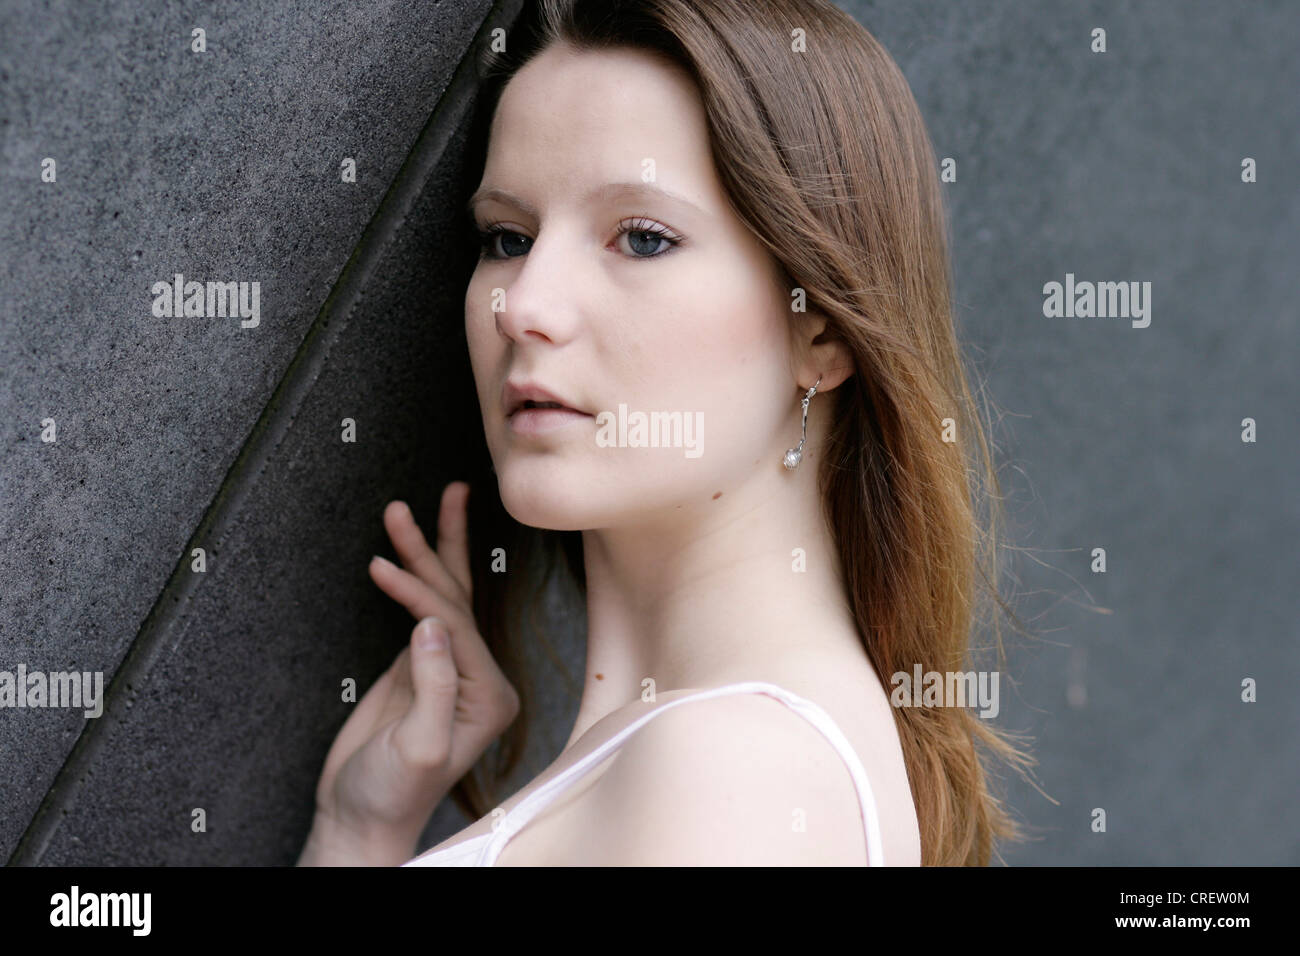 portrait of a young beautiful woman, Germany Stock Photo